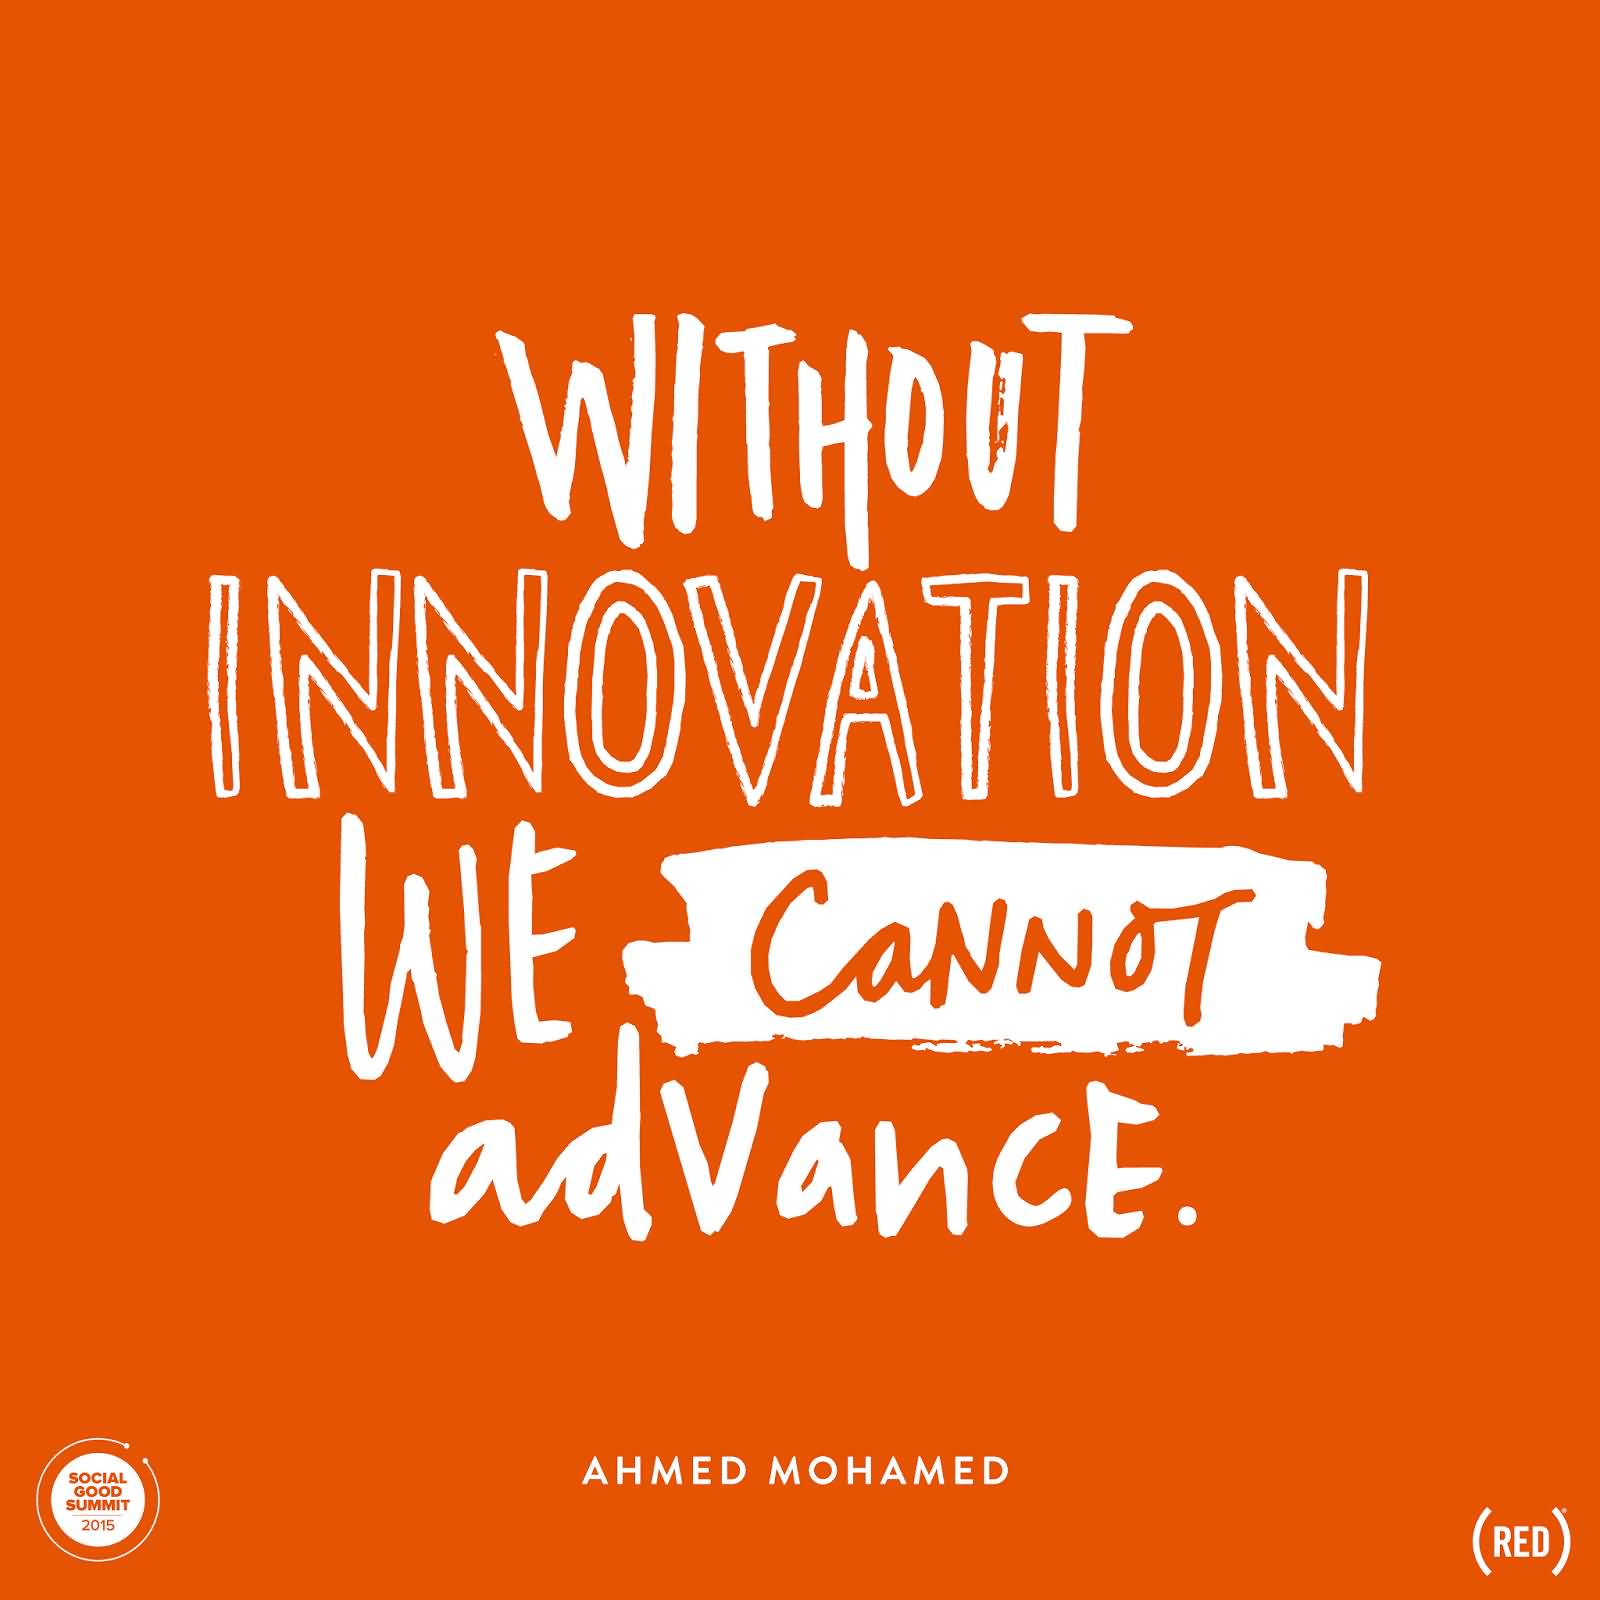 Without innovation we cannot advance. Ahmed Mohamed